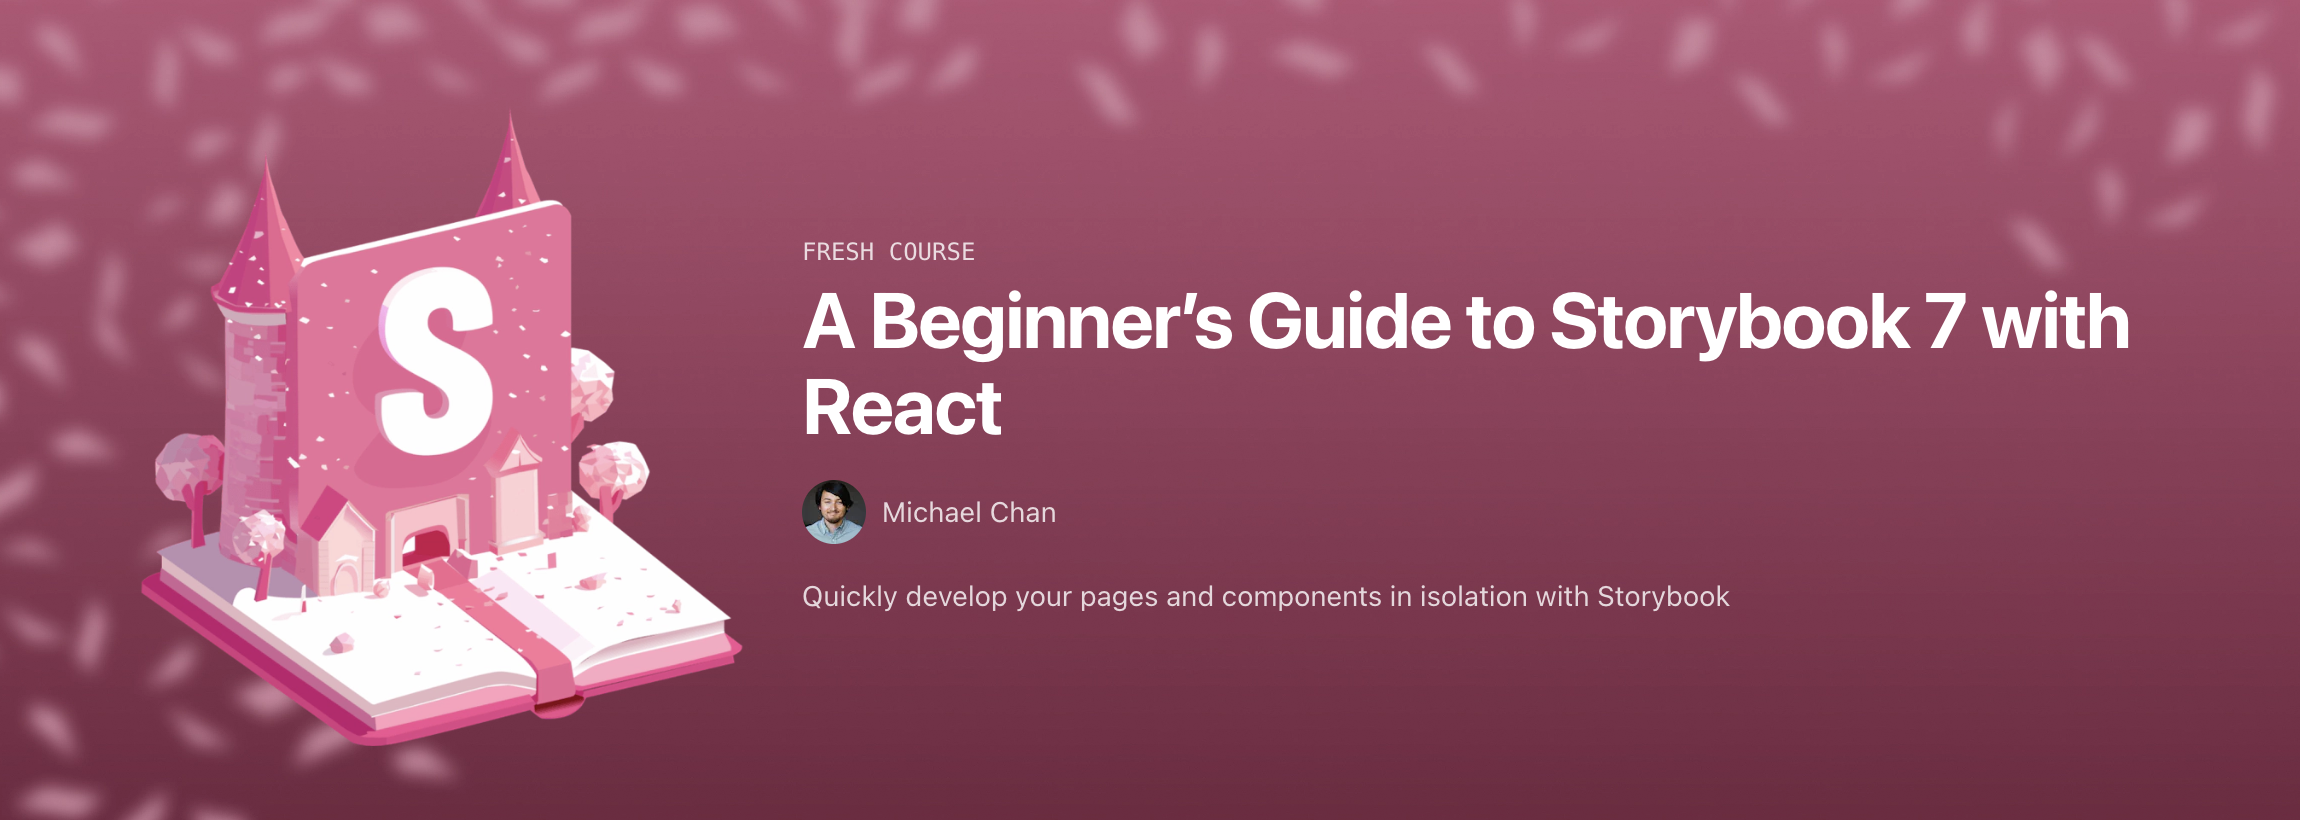 A Beginner's Guide to Storybook 7 with React promotional banner on eggead.io. Author: Michael Chan. Quickly develop yoru pages and components in isolation with Storybook"
